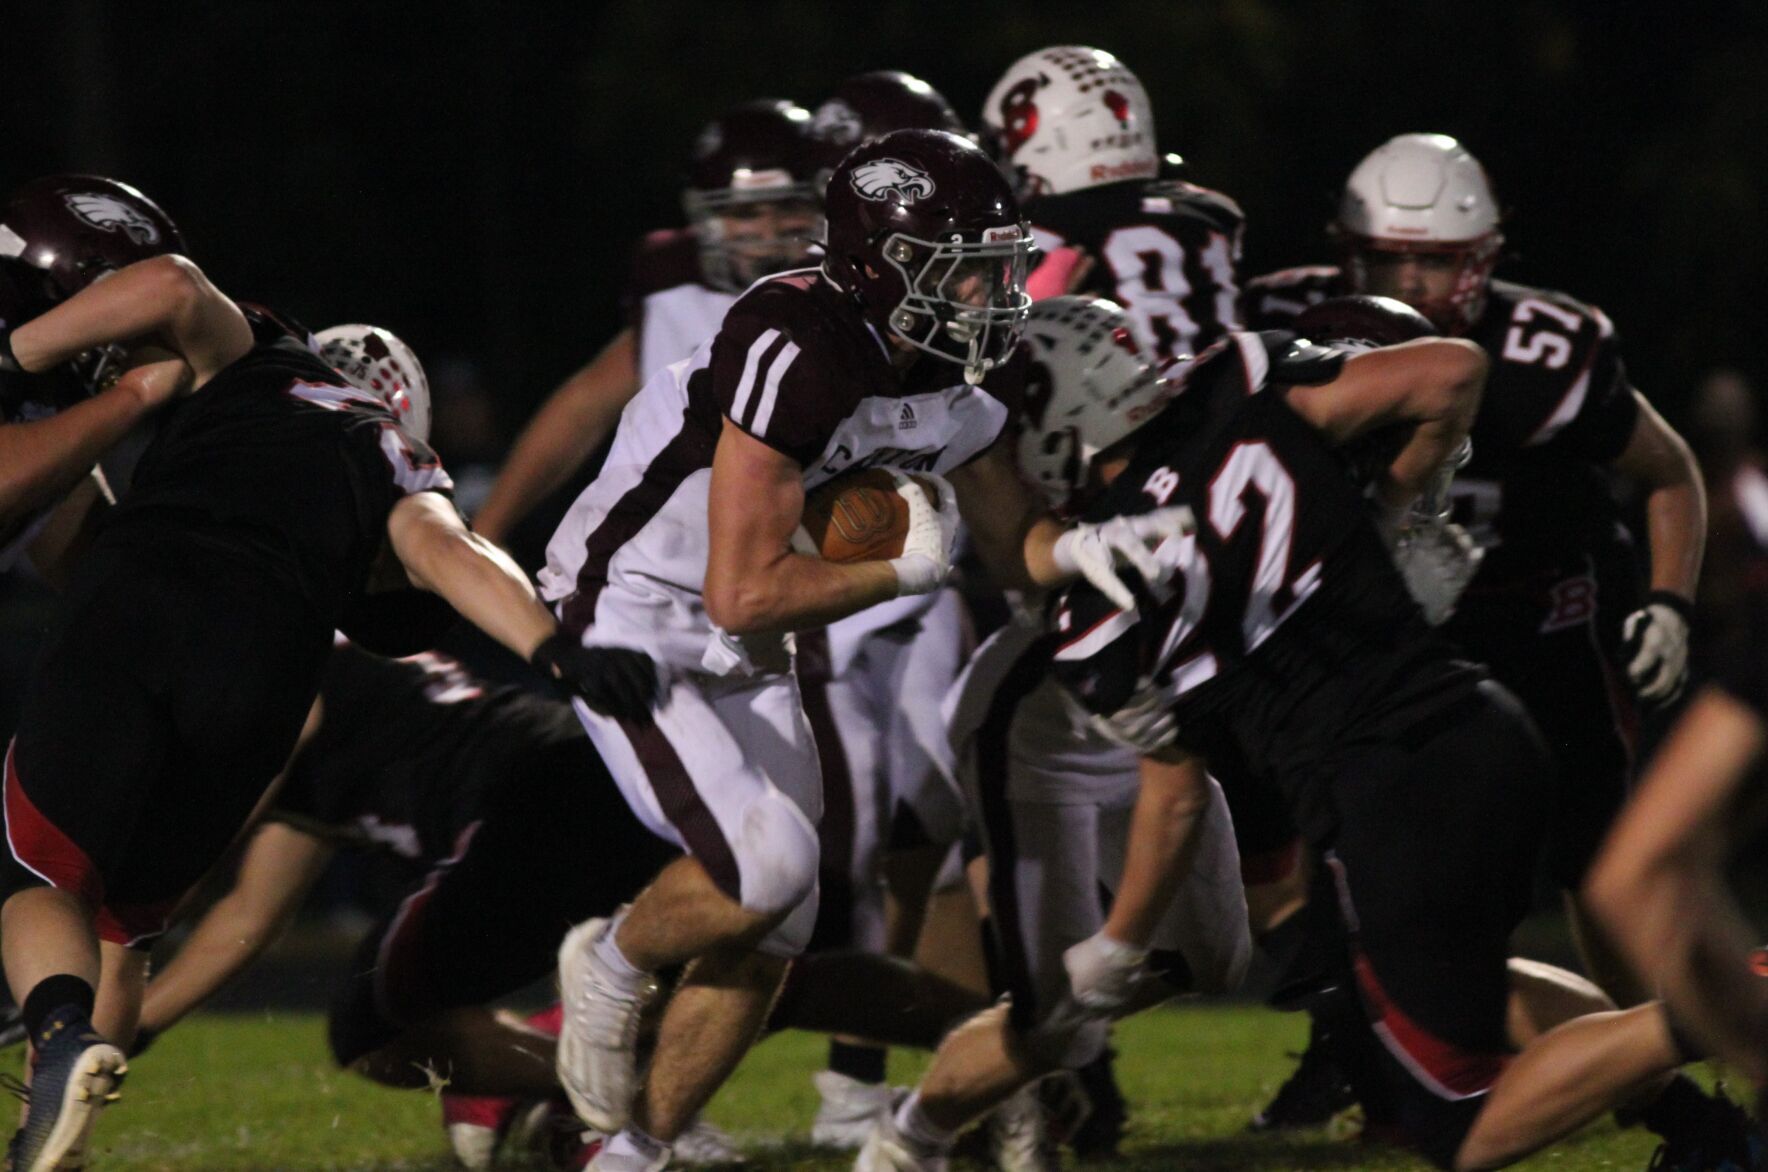 Cashton Senior Running Back Ethan Klinkner Leads Team to Victory with 86 Yards and 2 Touchdowns